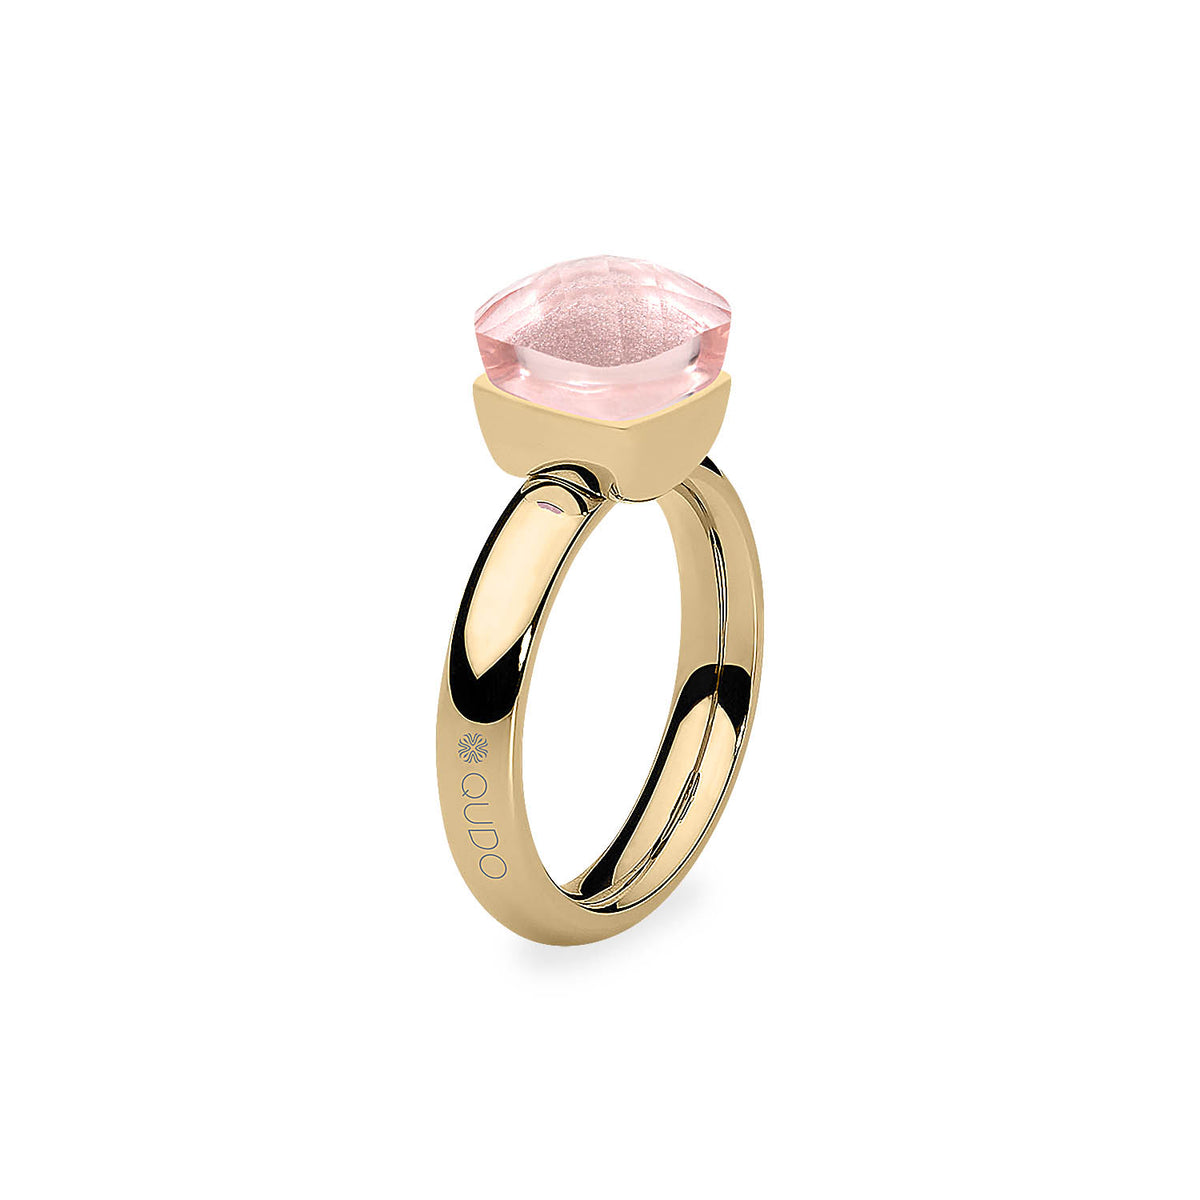 Firenze Ring - Shades of Rose & Grey - Gold